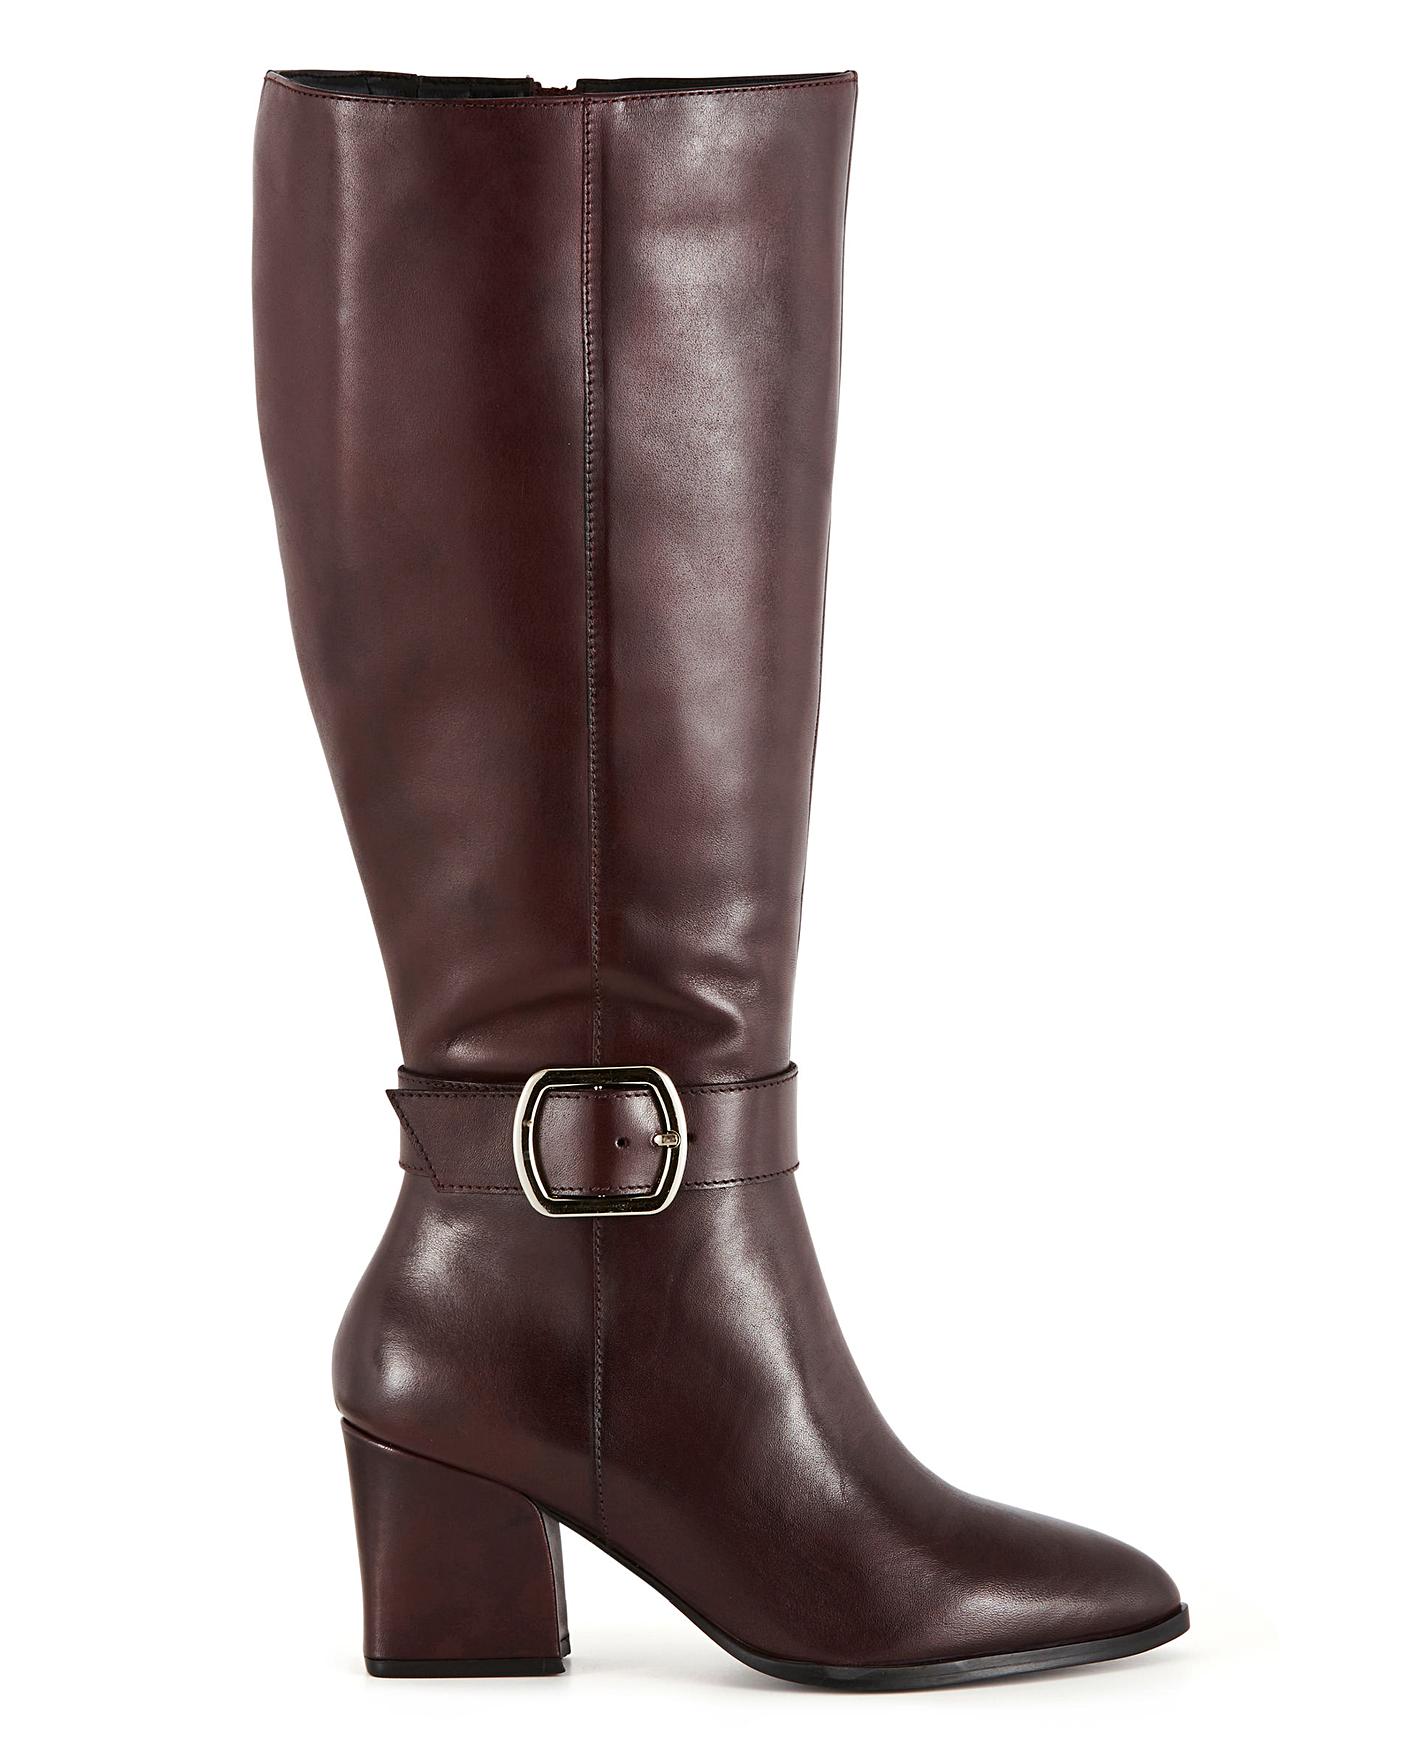 Leather Buckle Boots E Fit Curvy Calf 